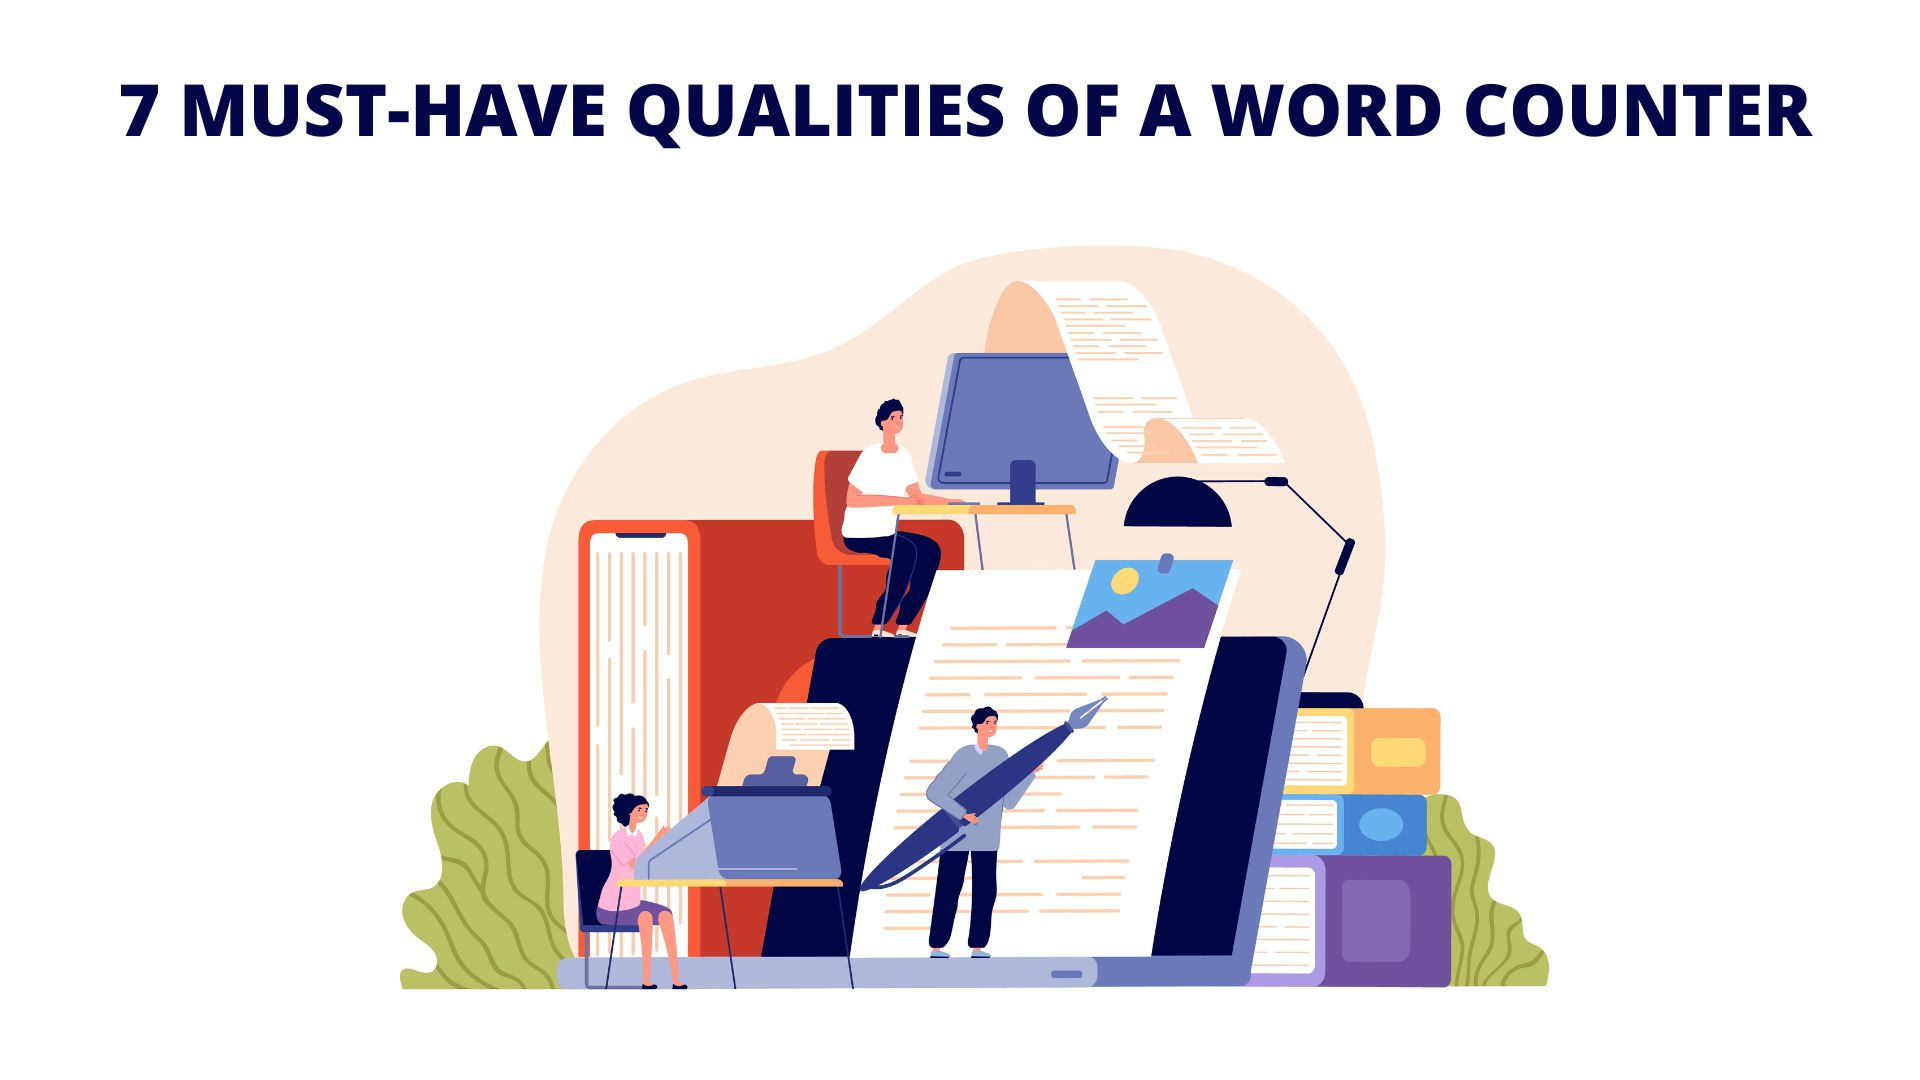 7 Must-Have Qualities of a Word Counter